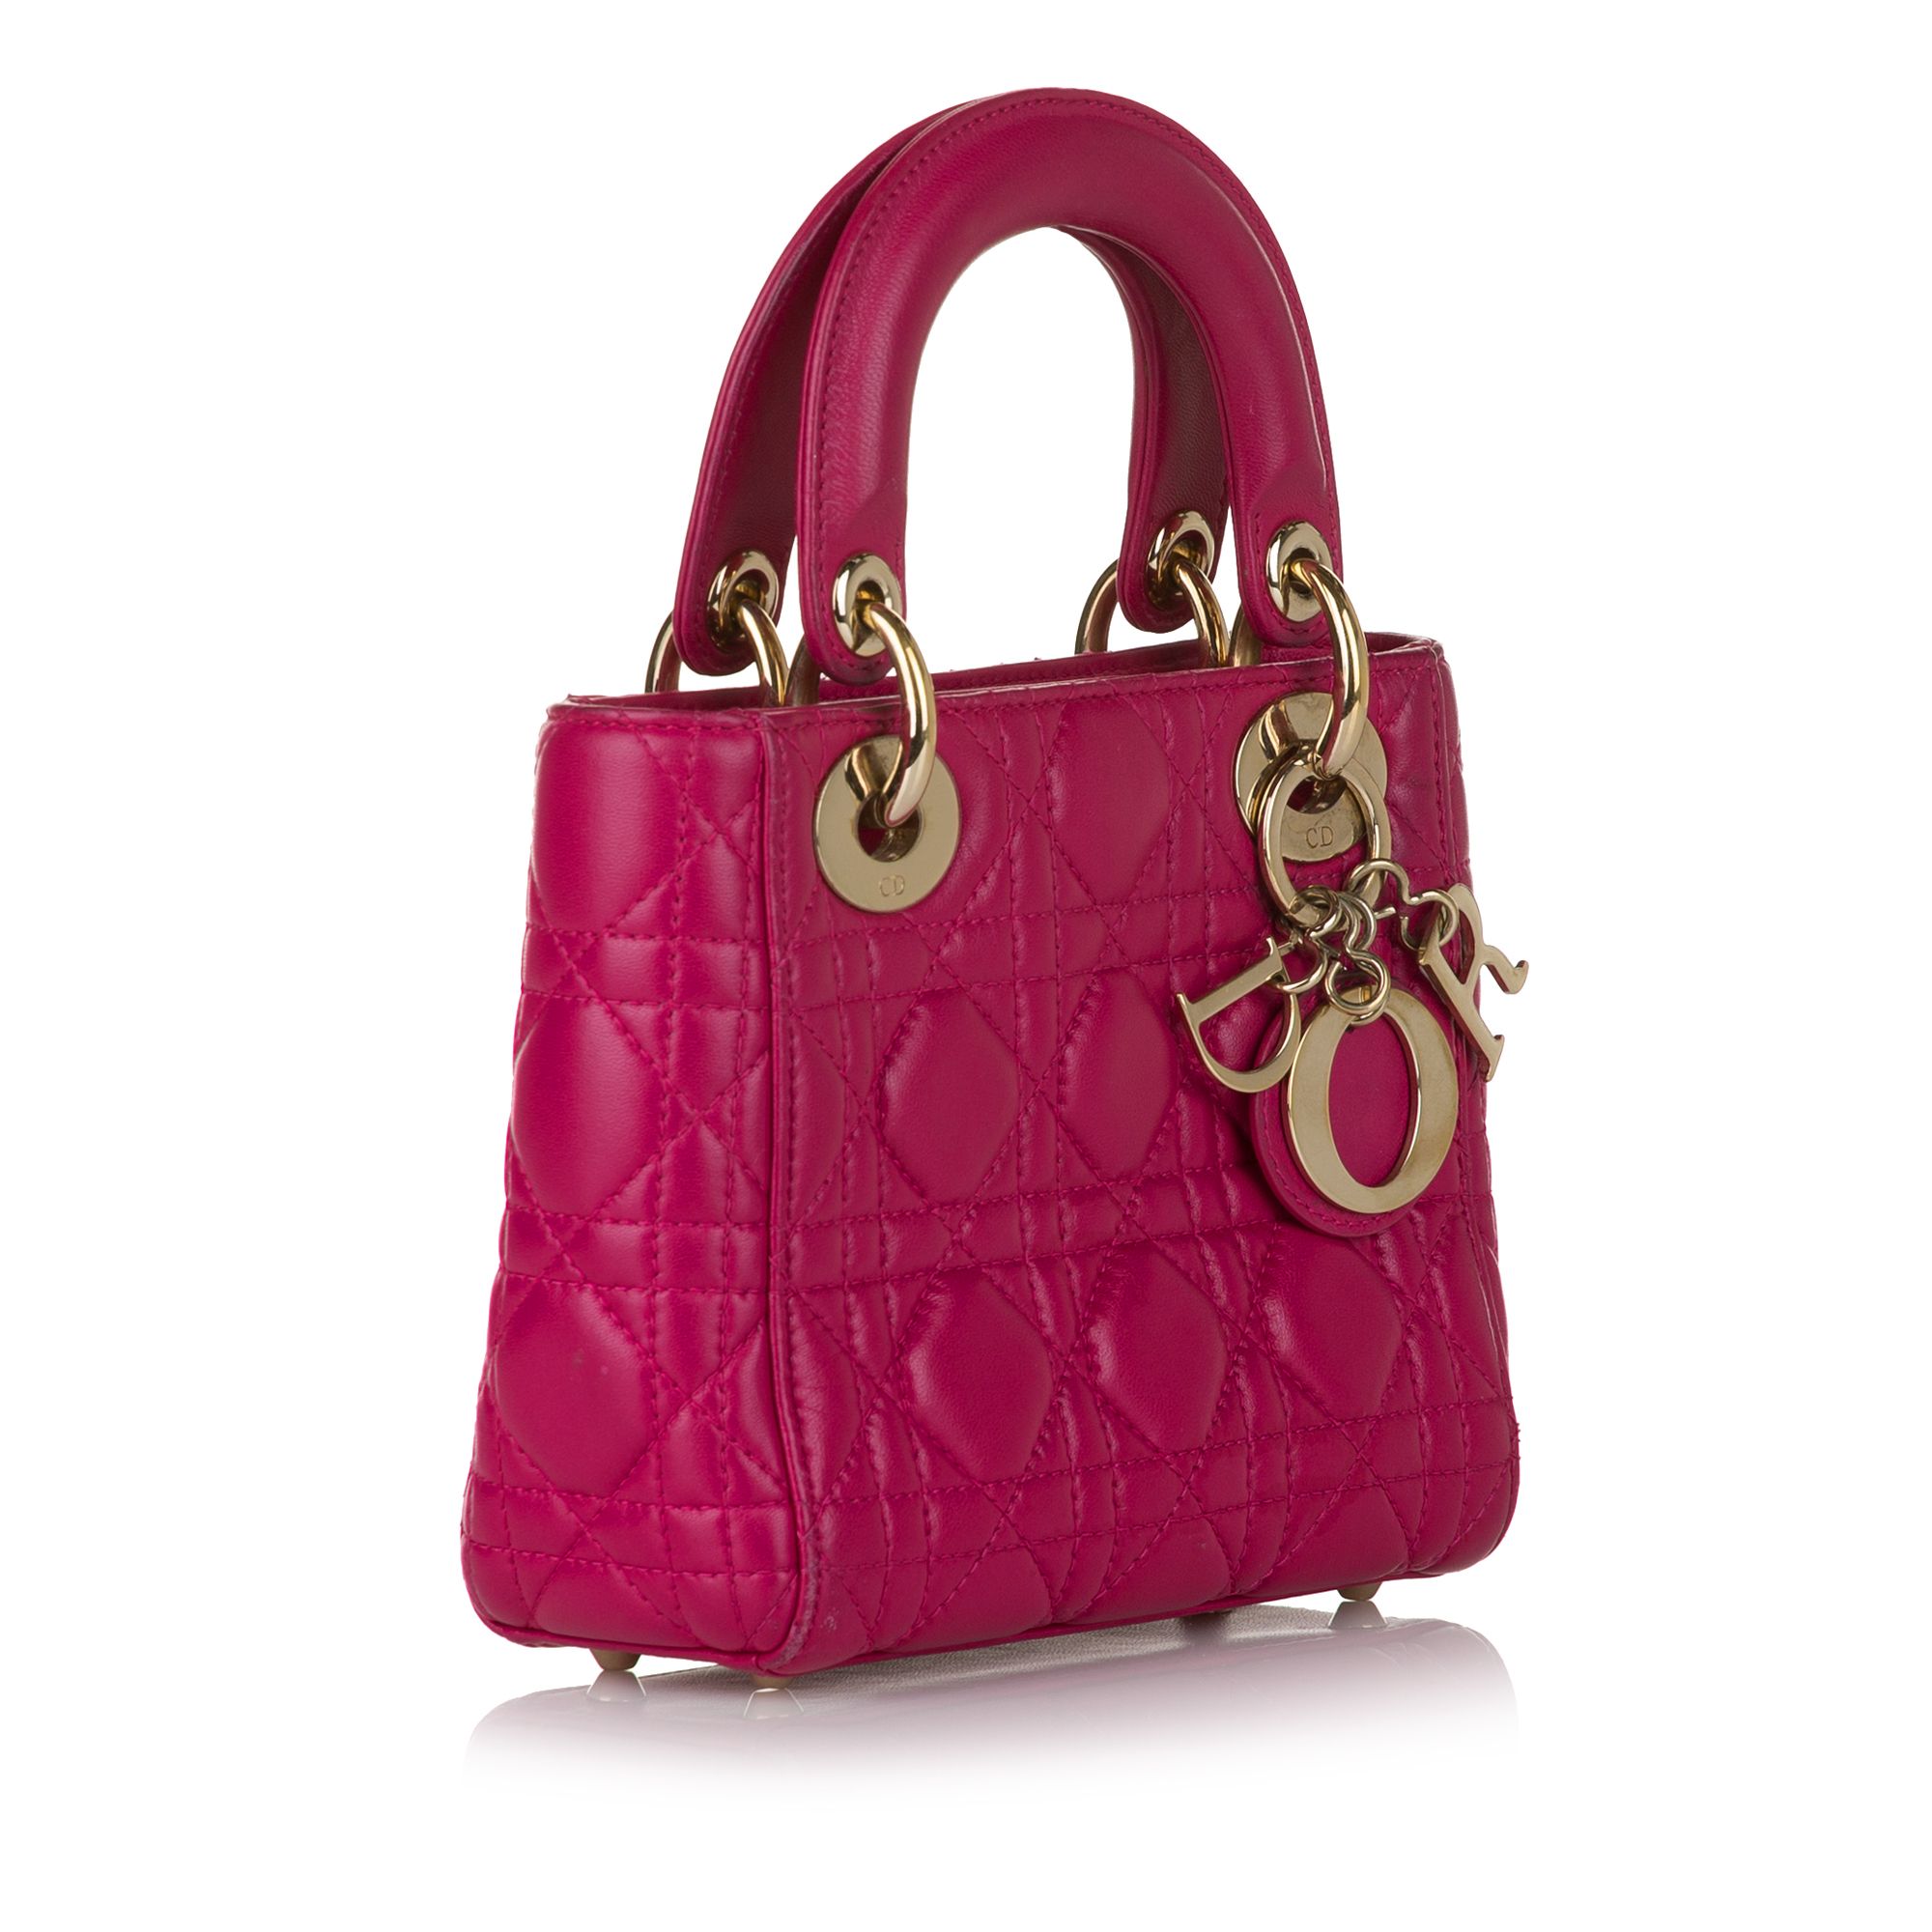 VINTAGE. RRP AS NEW. The Lady Dior features a quilted lambskin leather body, flat top handles, a detachable flat leather strap, a top zip closure, and an interior zip pocket.Exterior Back stained with Transfer Of Color. Exterior Handle Scratched. Exterior Corners Scratched. Exterior Top stained with Transfer Of Color. Embellishment Scratched. Exterior Back stained with Transfer Of Color. Exterior Handle Scratched. Exterior Corners Scratched. Exterior Top stained with Transfer Of Color. Embellishment Scratched. 

Dimensions:
Length 14cm
Width 17cm
Depth 7cm
Hand Drop 7cm
Shoulder Drop 65cm

Original Accessories: Shoulder Strap

Color: Pink
Material: Leather x Lambskin Leather
Country of Origin: Italy
Boutique Reference: SSU161183K1342


Product Rating: GoodCondition

Certificate of Authenticity is available upon request with no extra fee required. Please contact our customer service team.